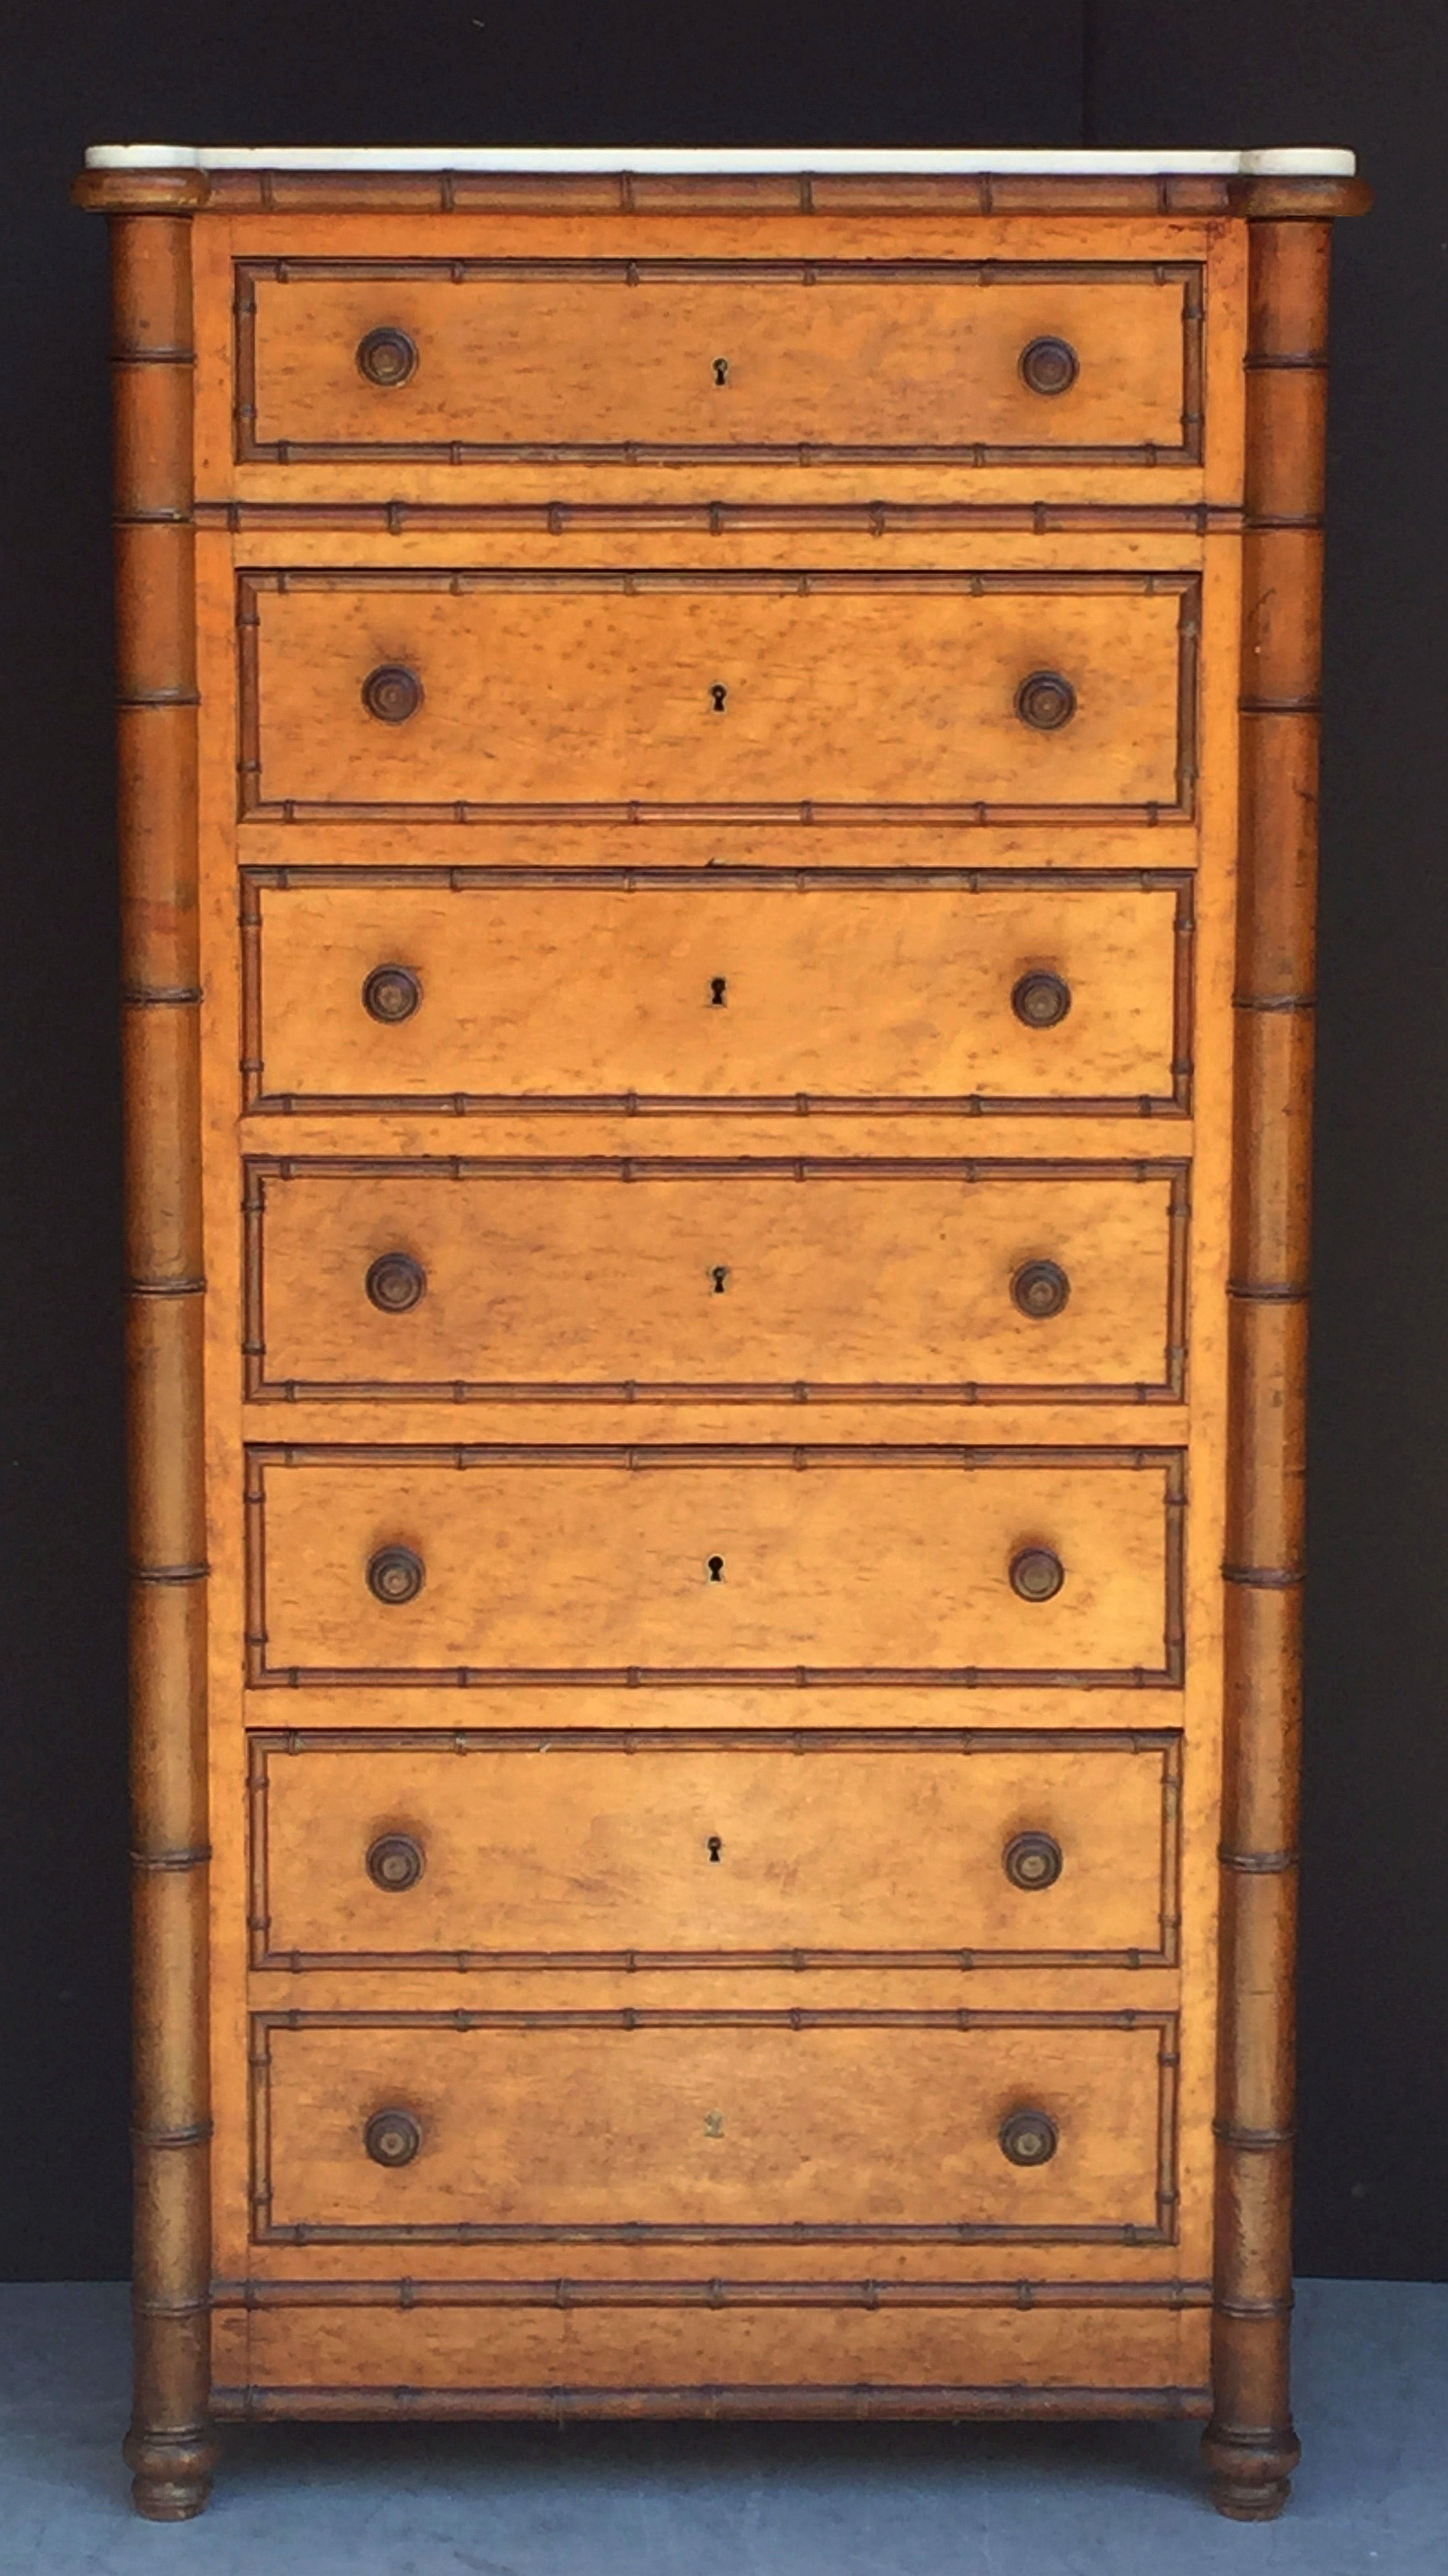 A fine French semainier collector's cabinet or chest of faux bamboo and figured curly or bird's-eye maple, fondly known as a Wellington in England, featuring a marble top over seven drawers, with decorative faux bamboo accents, turned knobs, and